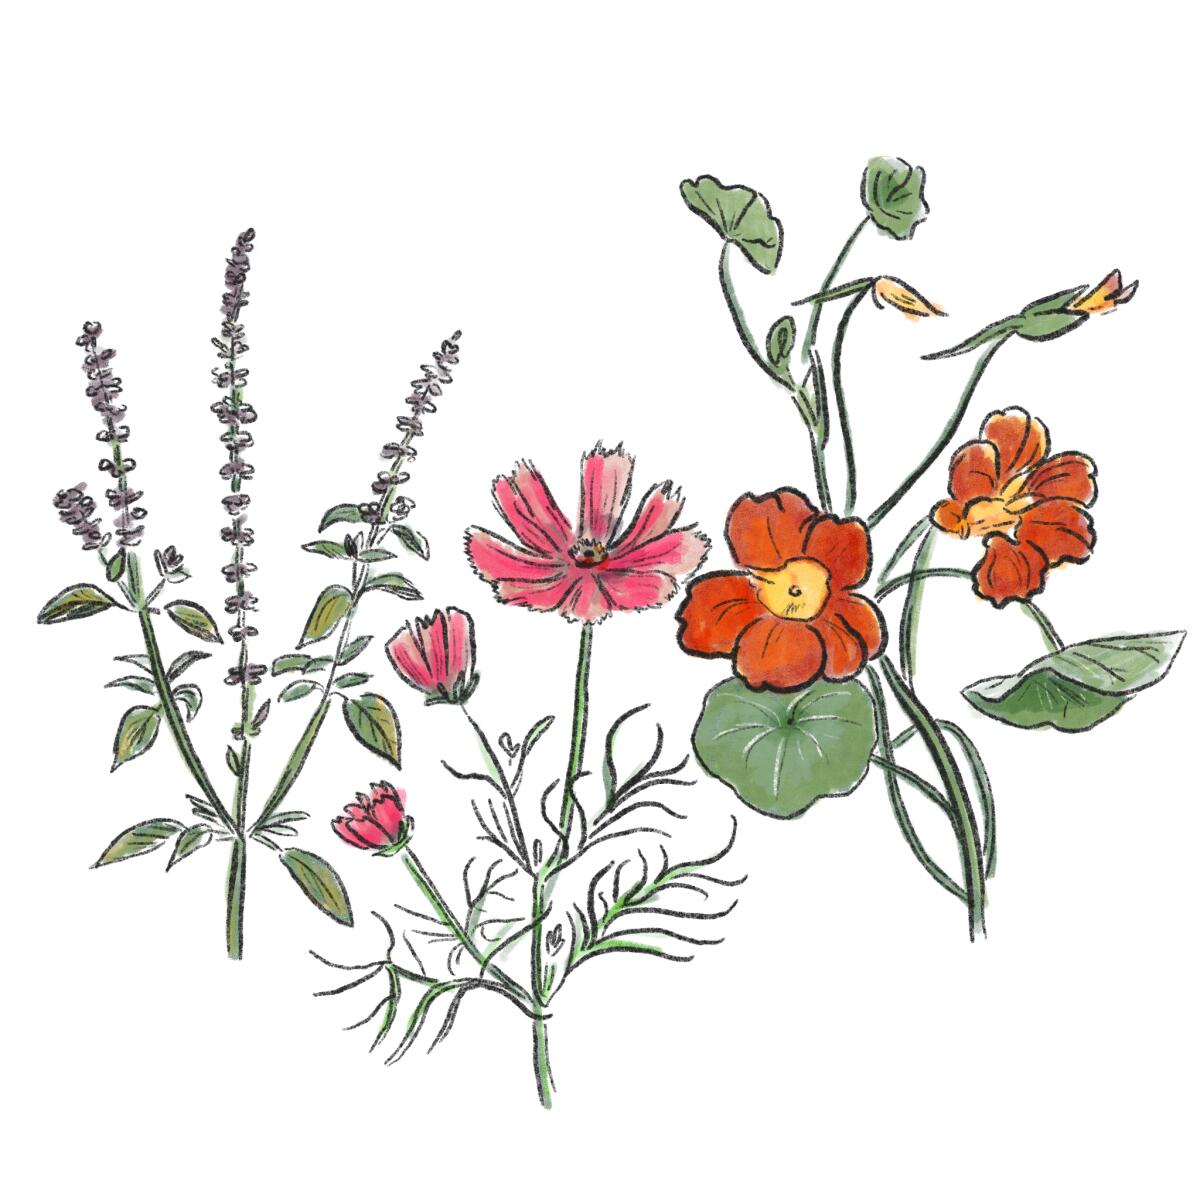 An illustration of cosmos, bright orange and yellow nasturtiums and African blue basil